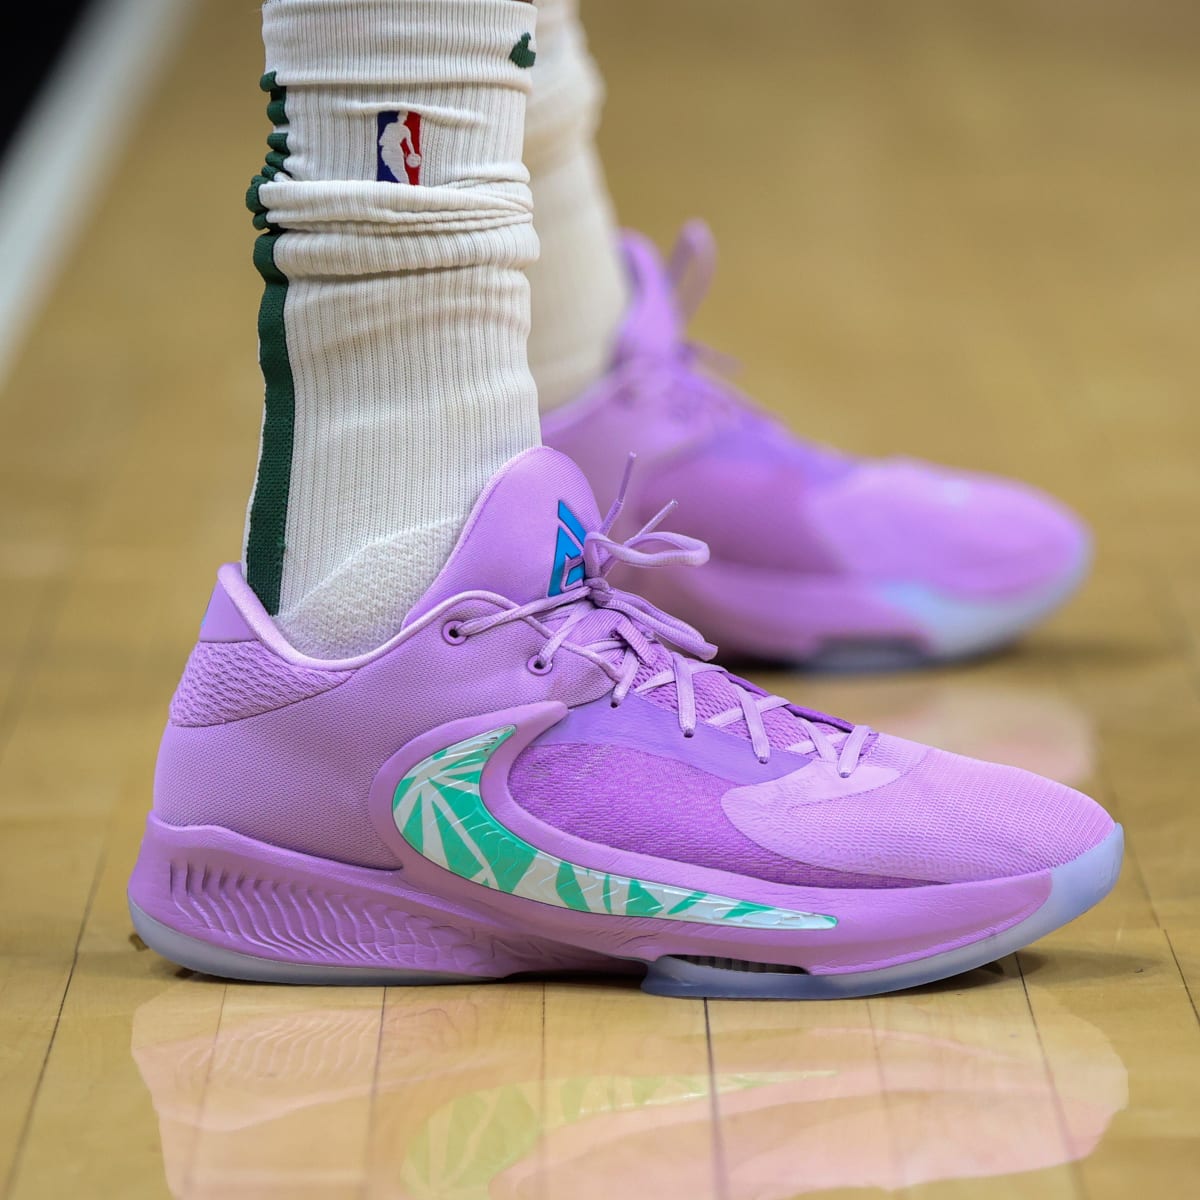 BES in stand houden identificatie Giannis Antetokounmpo's Nike Shoes Discounted Online - Sports Illustrated  FanNation Kicks News, Analysis and More